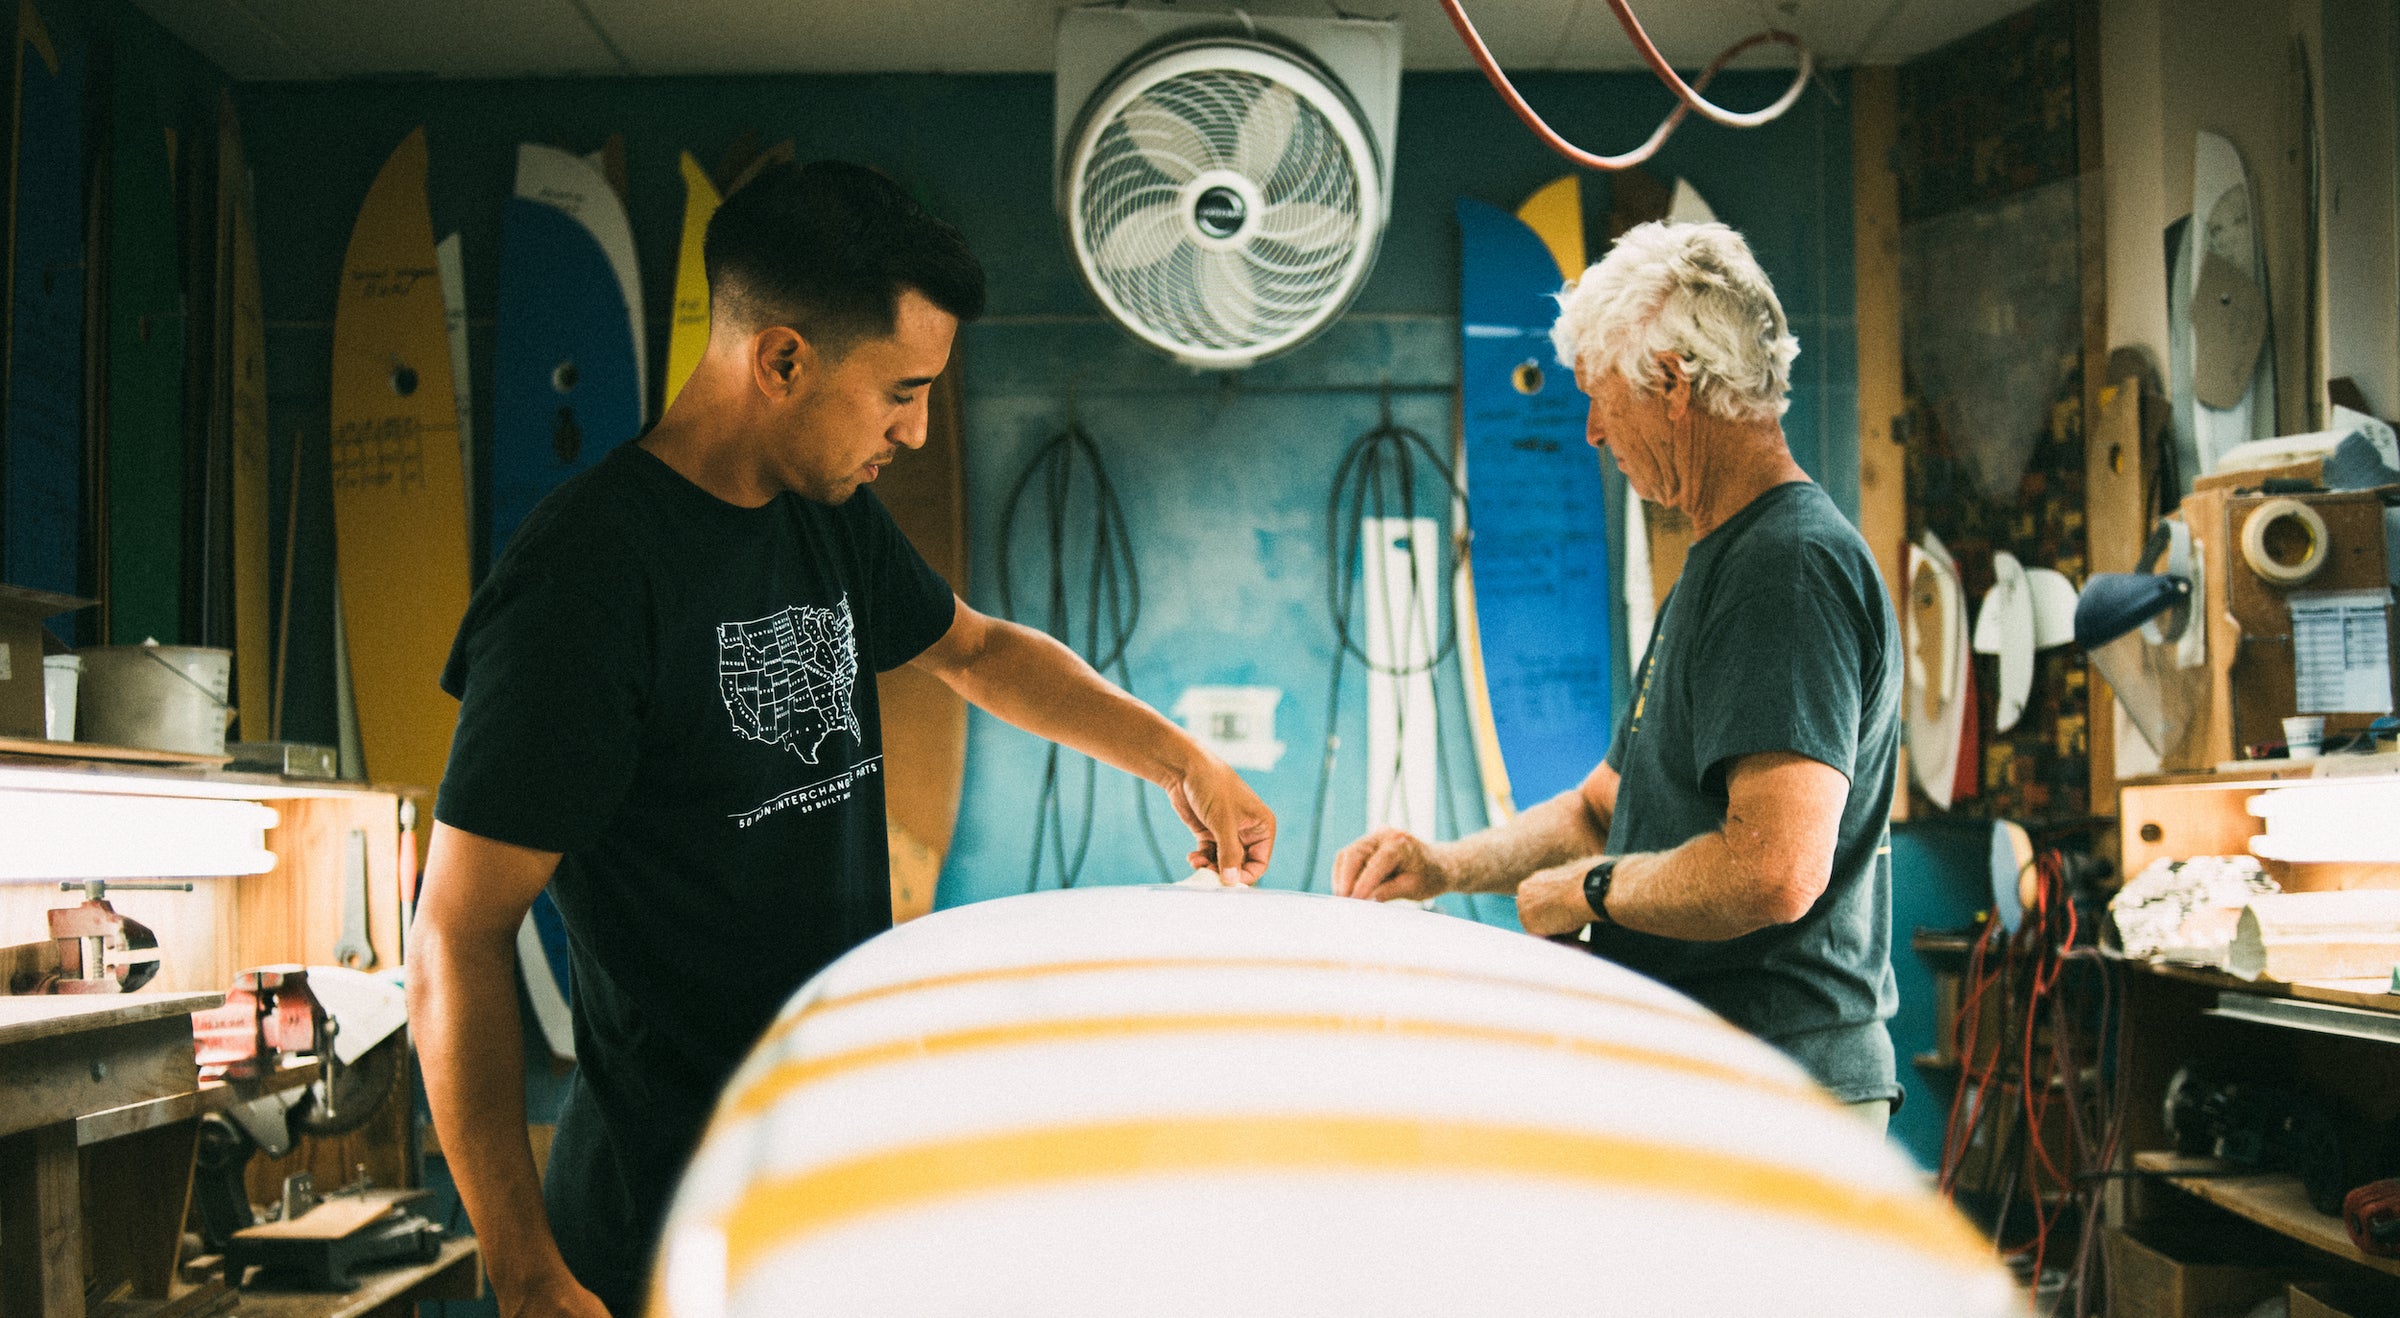 Father and son Steve and Dave Boehne shape surfboards in Dana Point, California